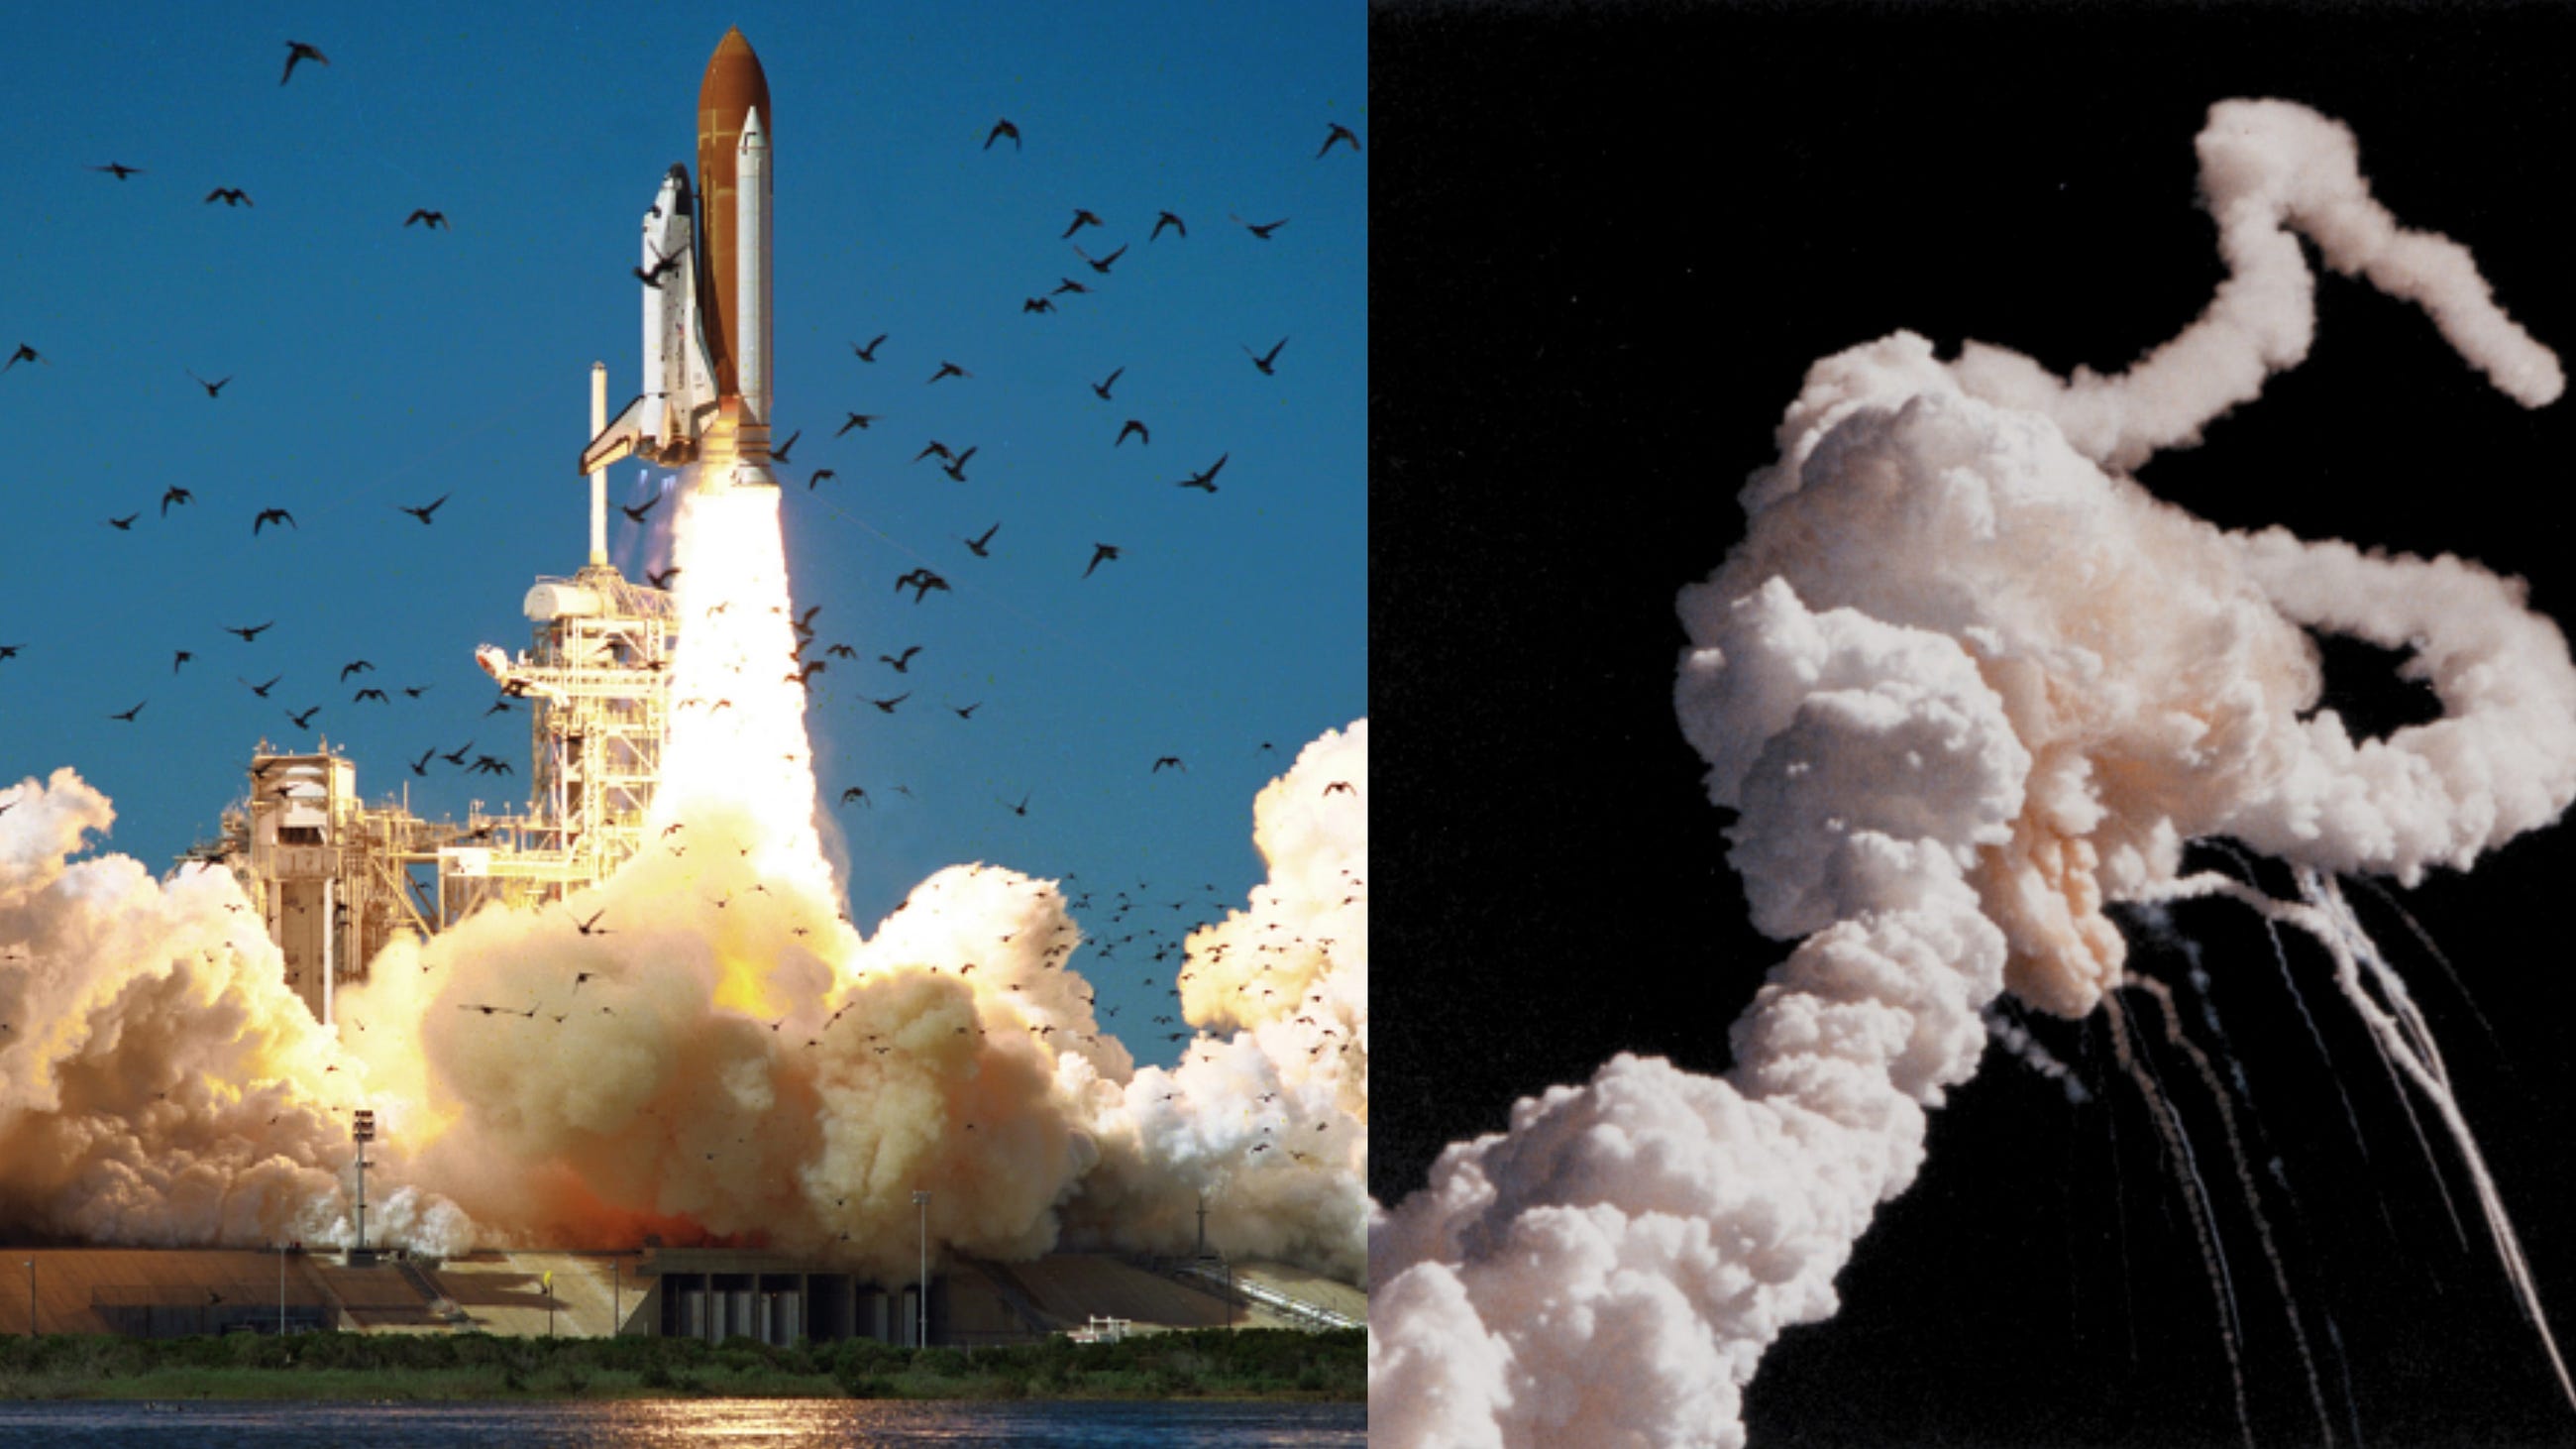 Space Shuttle Challenger Disaster: The Crew Survived the Explosion